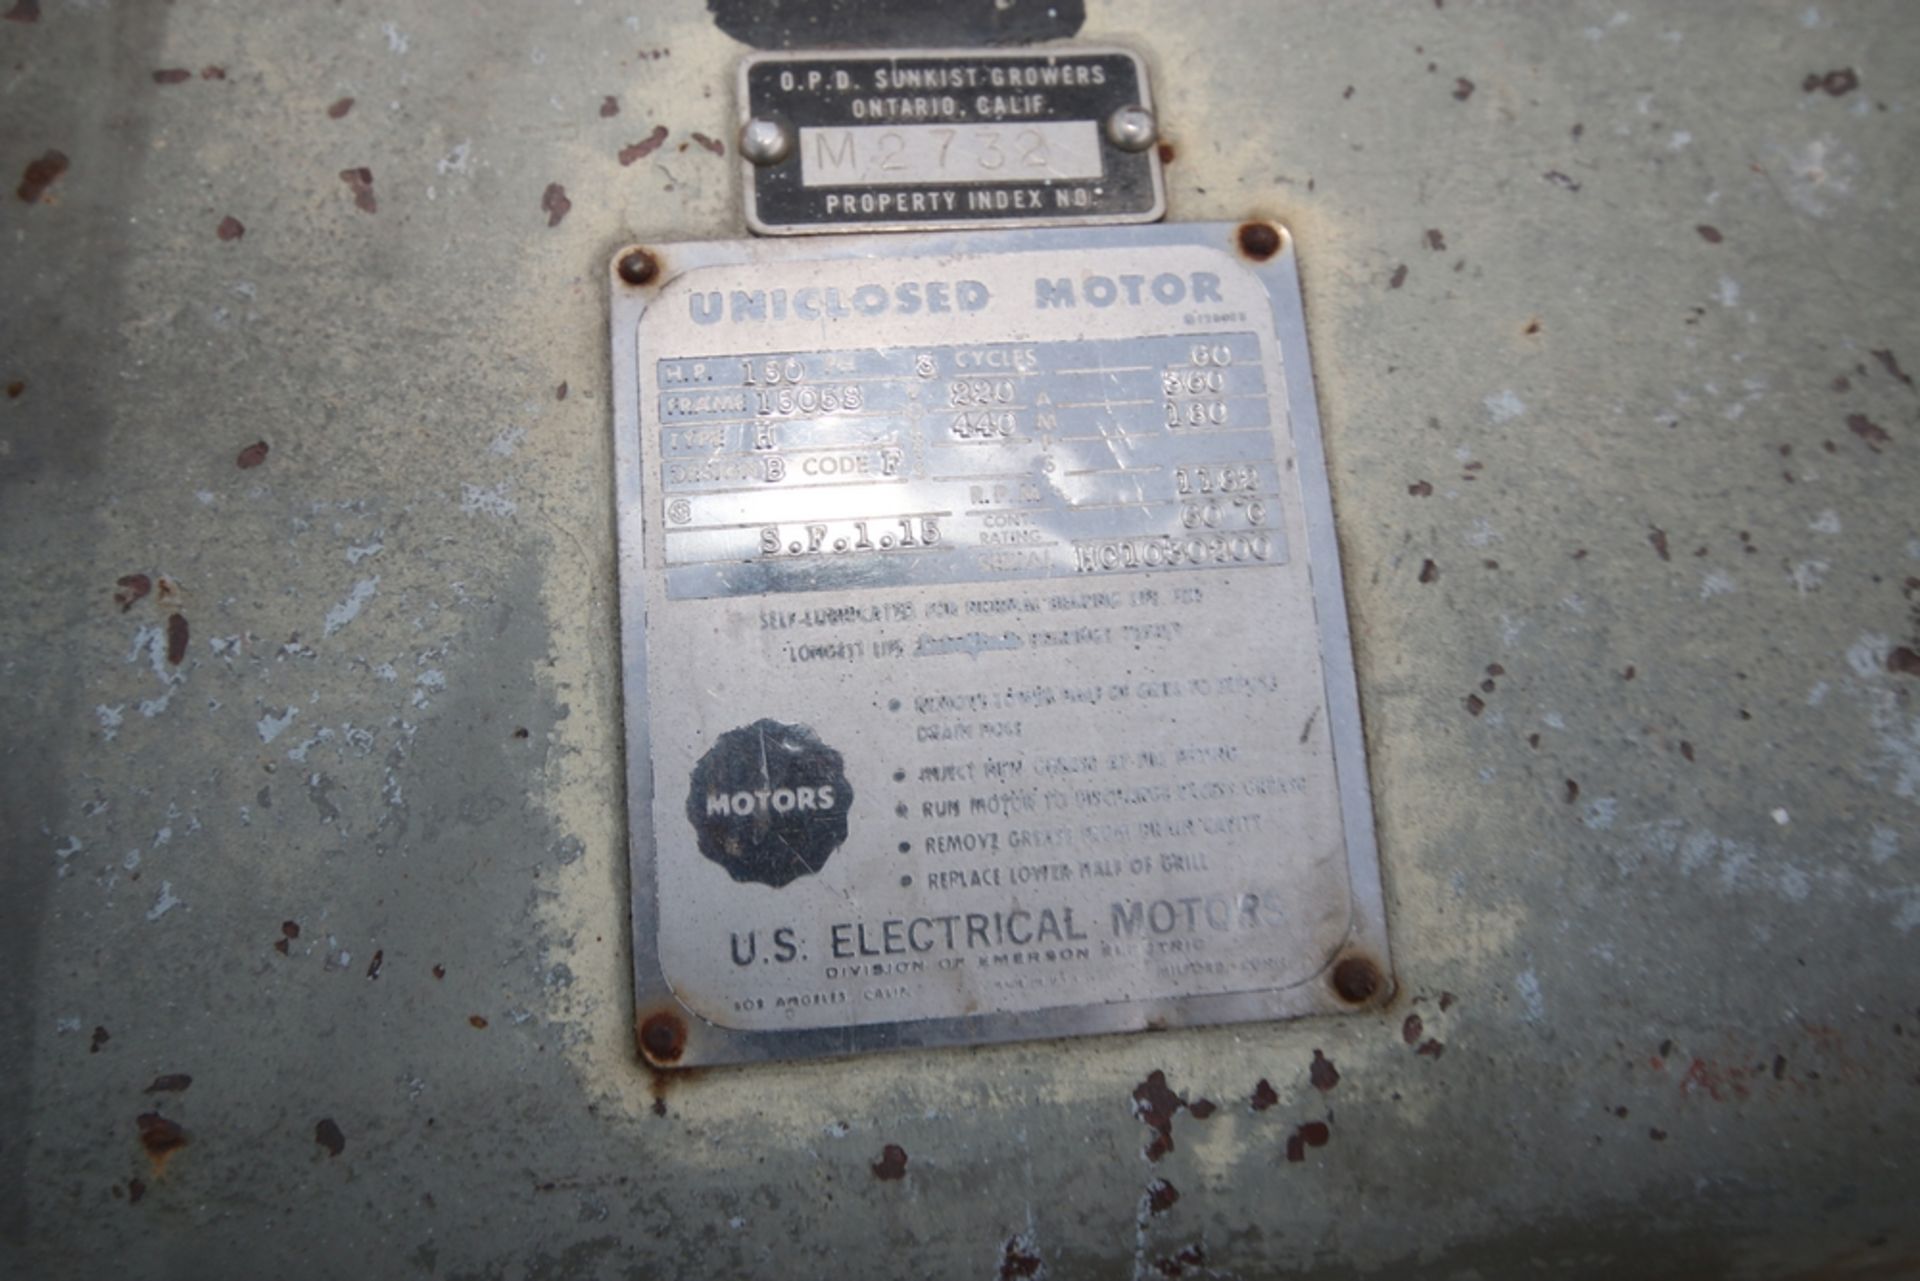 U.S. Electric 150 hp Motor, 1182 RPM, 220/440 Volts - Image 2 of 2